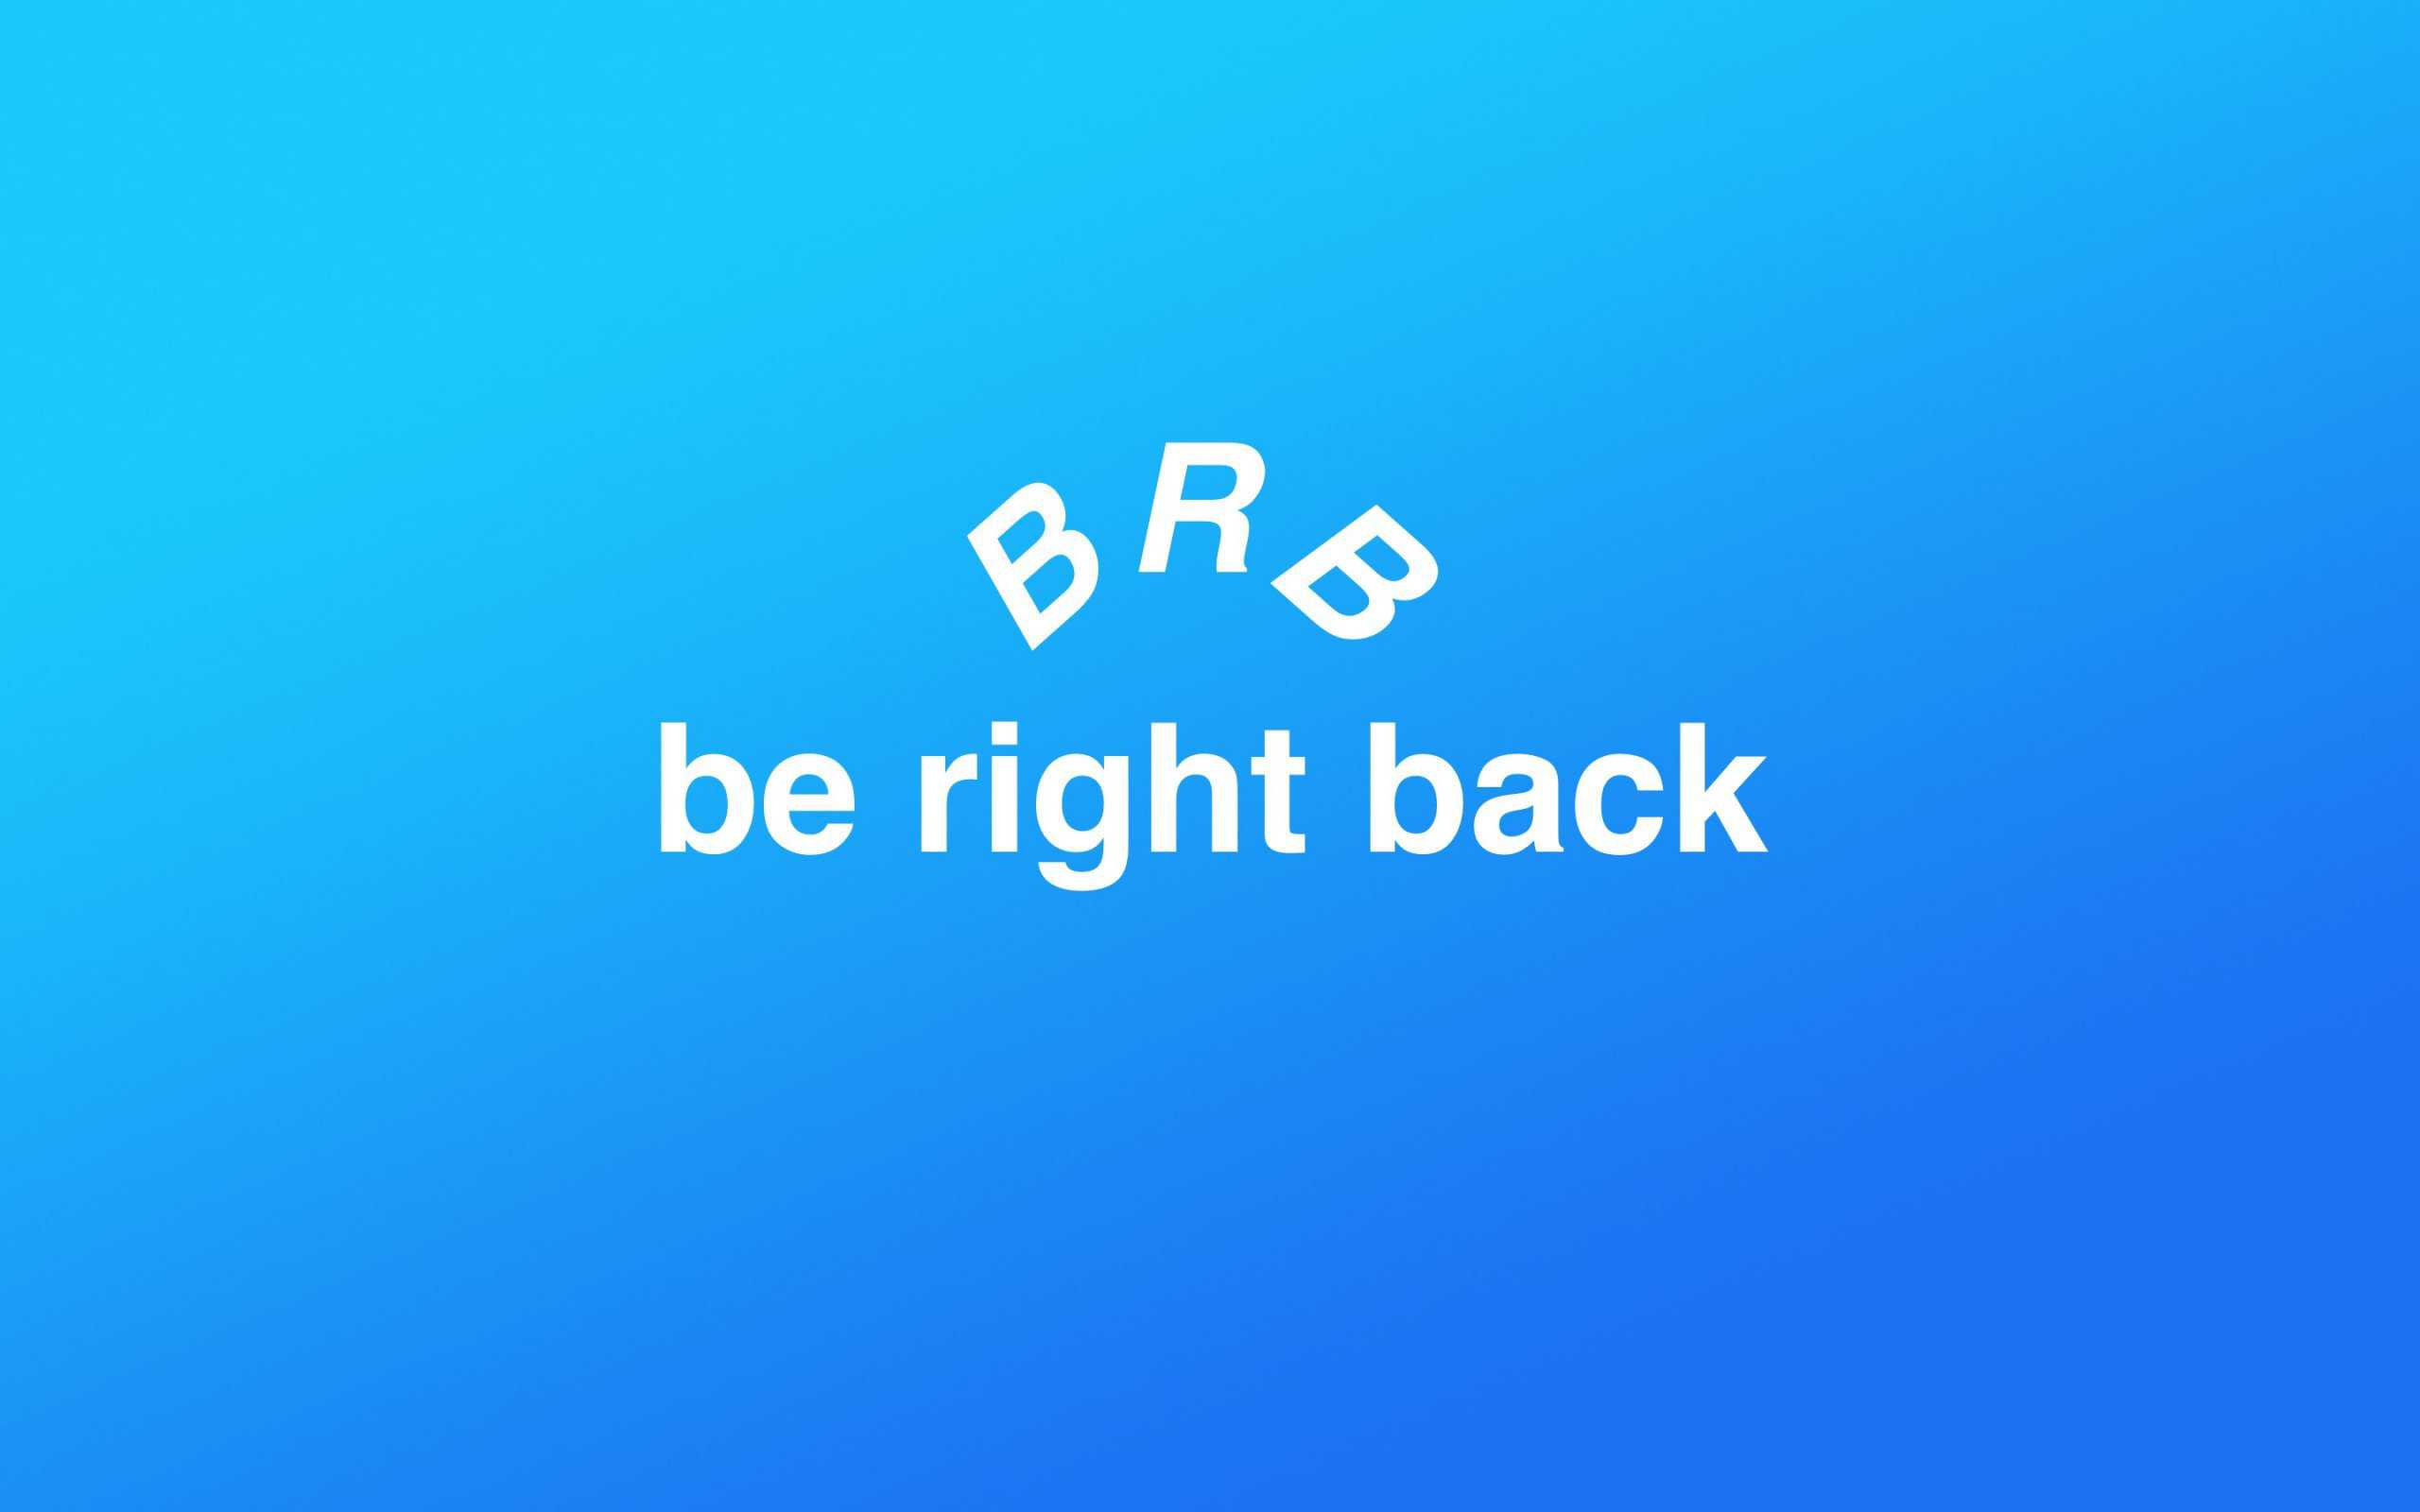 What Does BRB Mean?